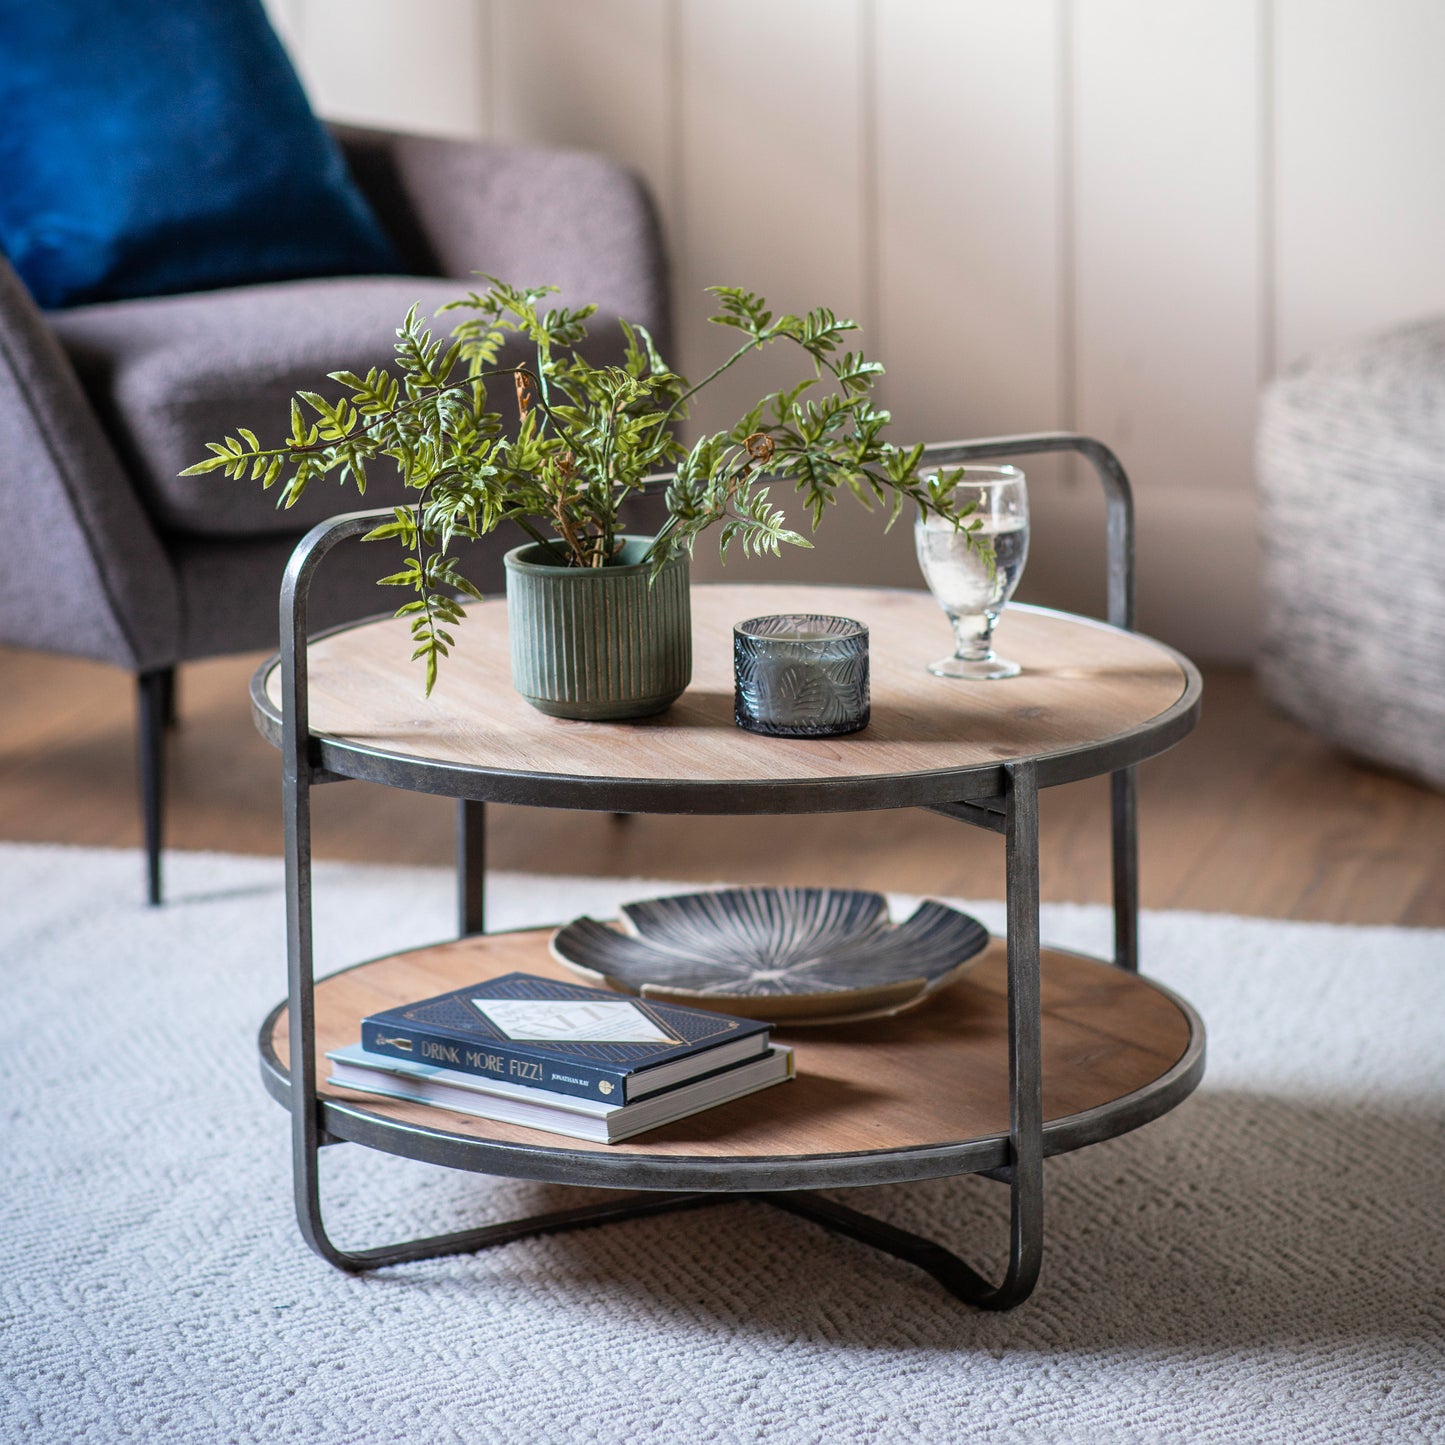 A Lutton Coffee Table Oak 650x650x500mm by Kikiathome.co.uk, blending home furniture with a plant on top for interior decor.